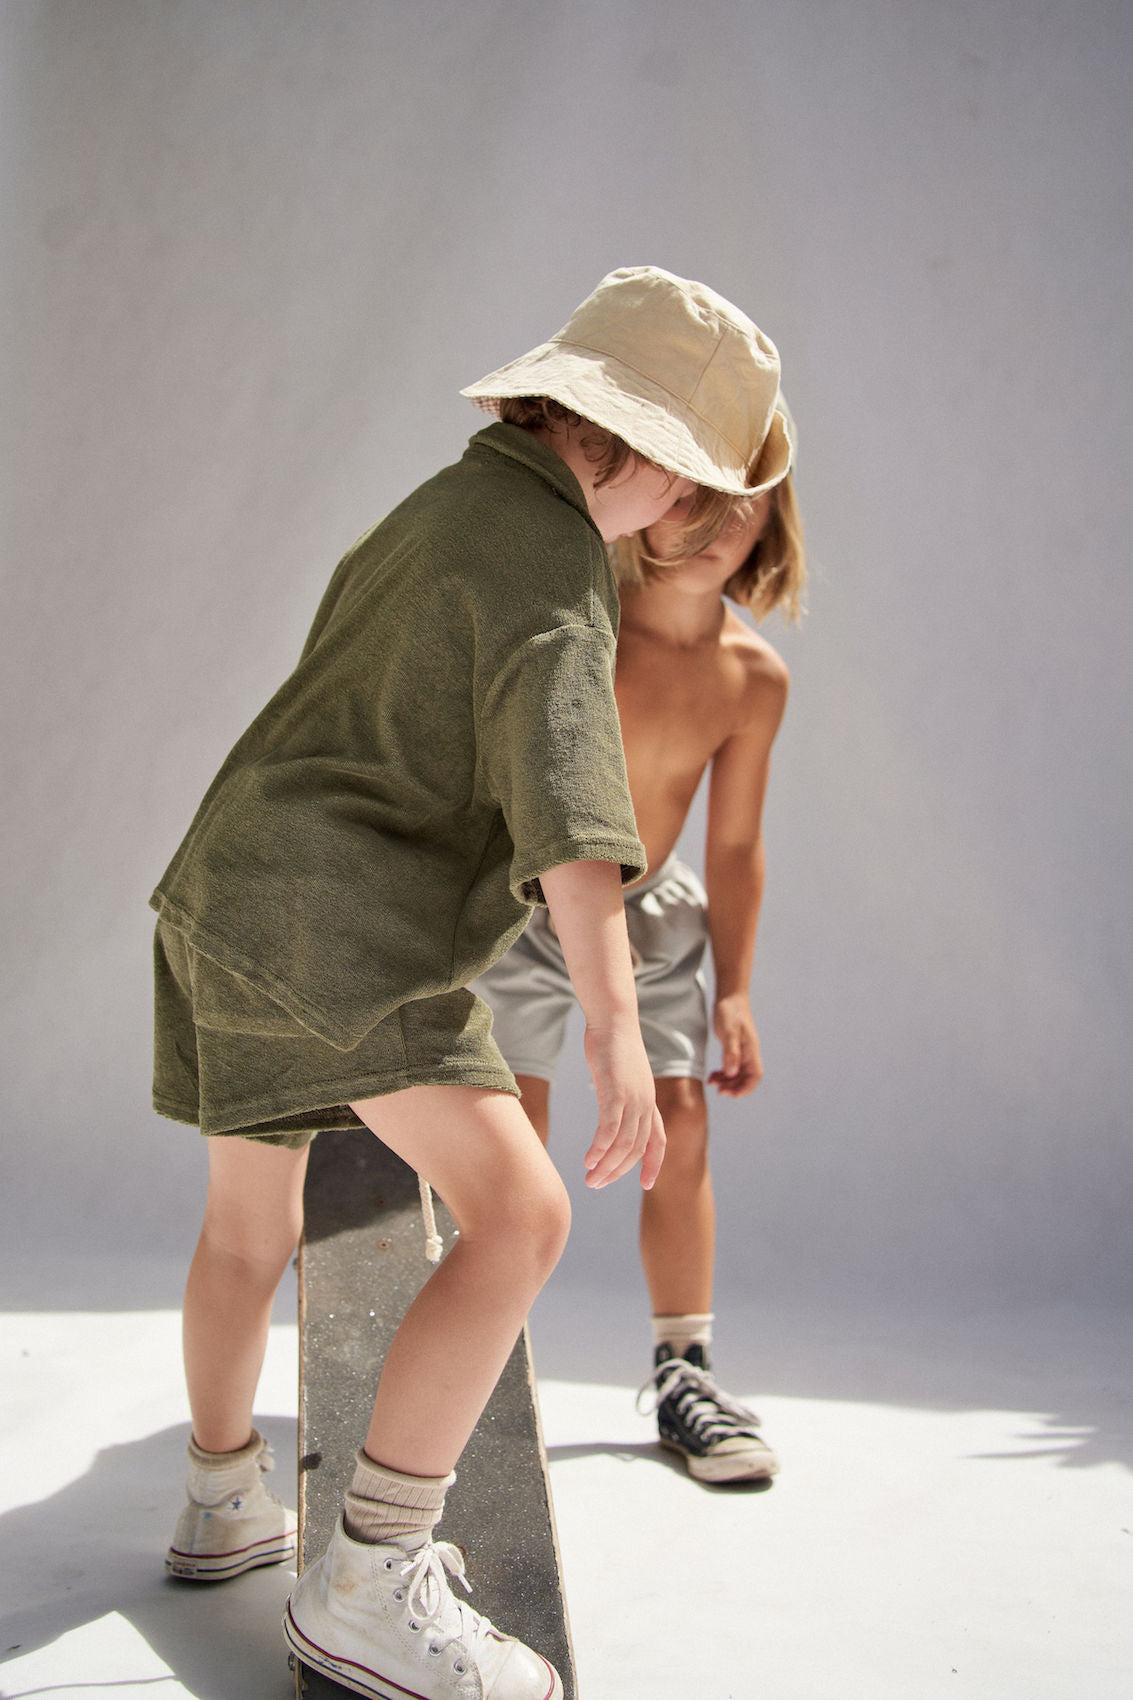 Billie Button Up Set in Khaki Terry, Kids Sets, Children's Clothing, Little the Label